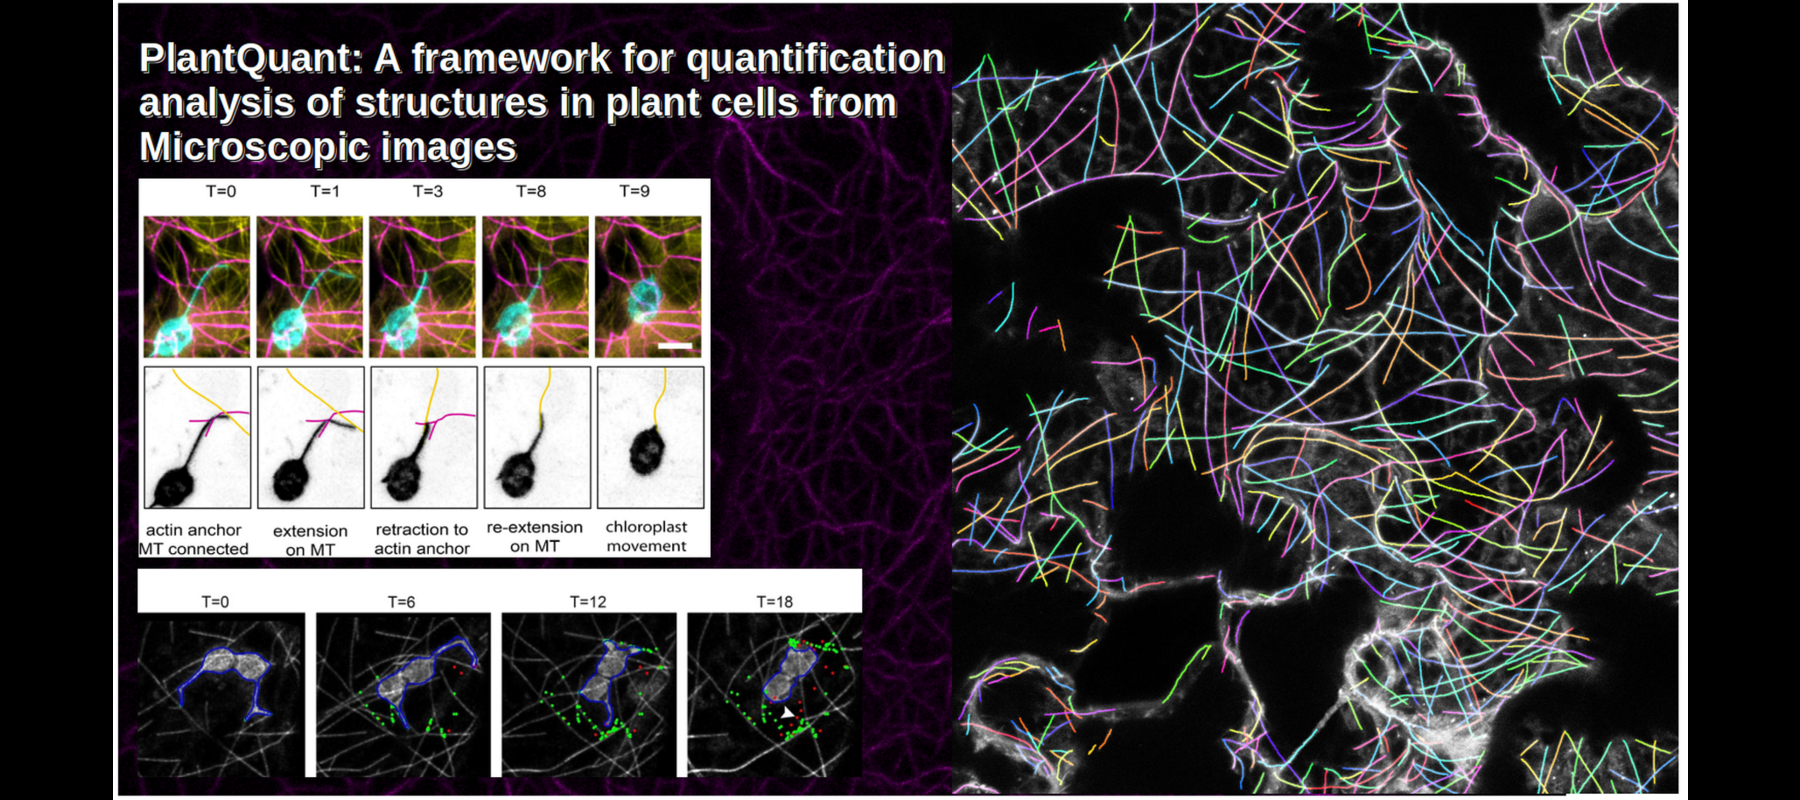 PlantQuant: A framework for quantification analysis of structures in plant cells from microscopic images